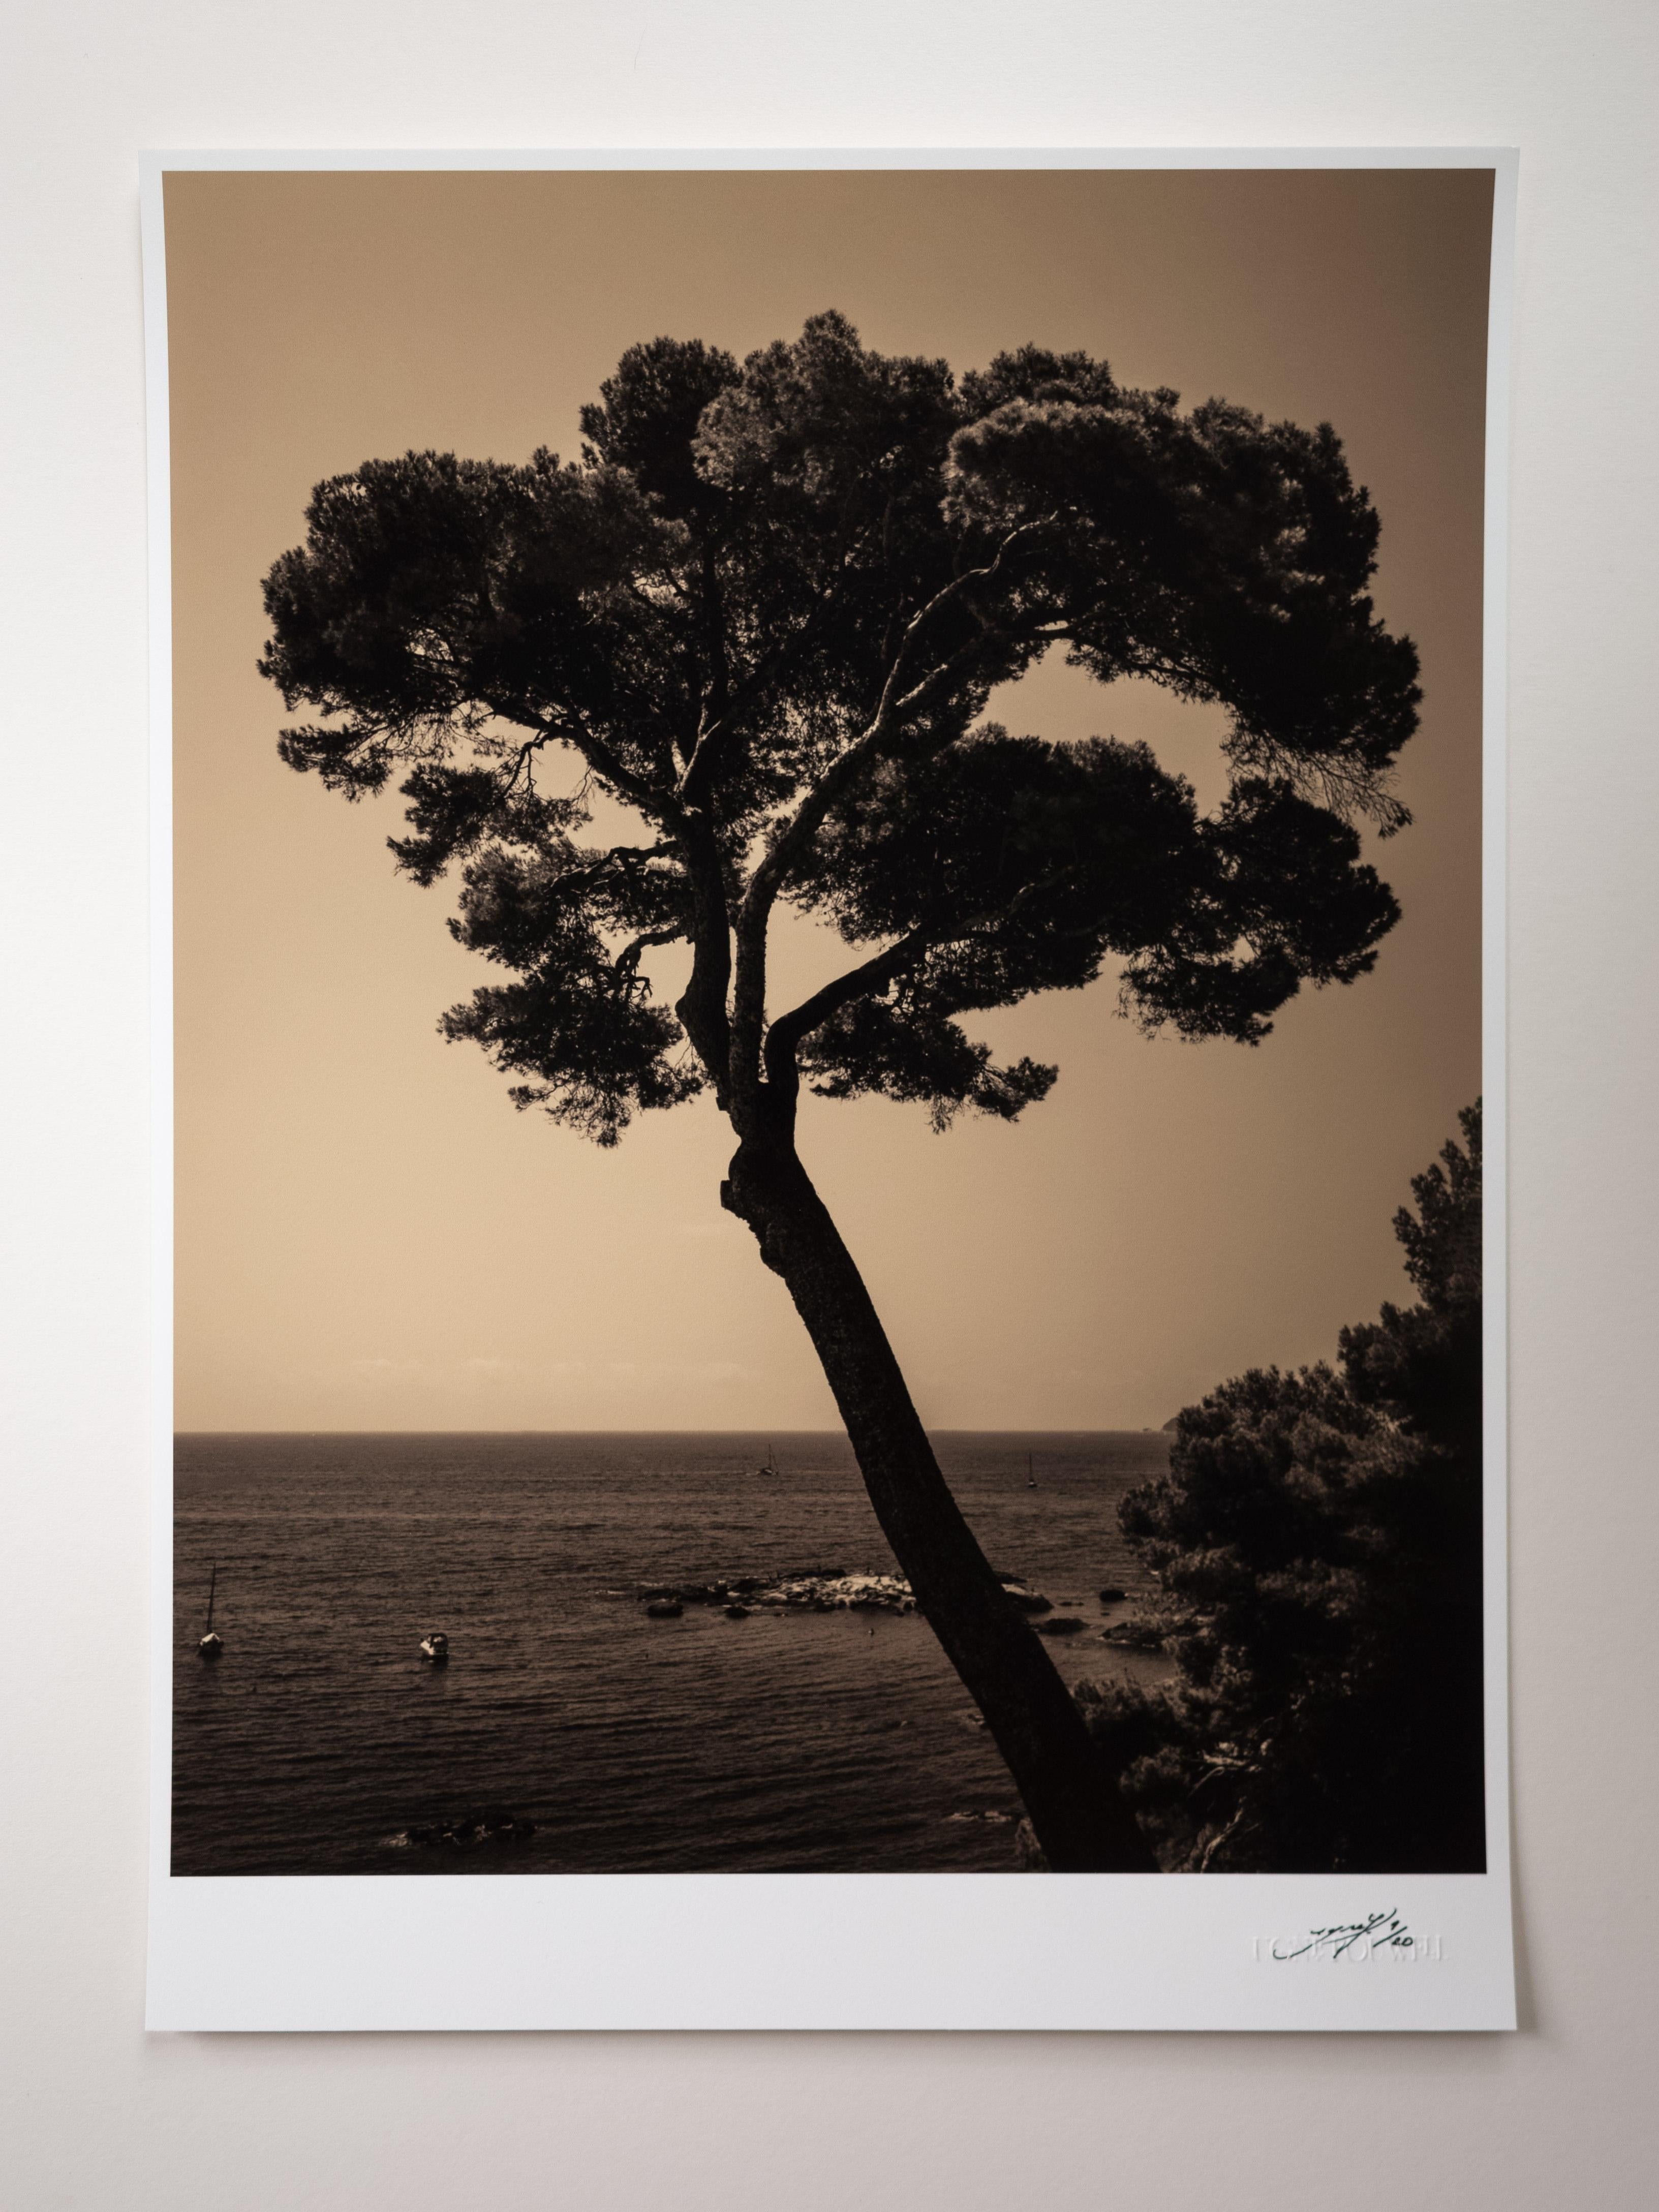 Prevail - monocolour photography of Italian riviera, eiditon of 20 - Photograph by Ugne Pouwell